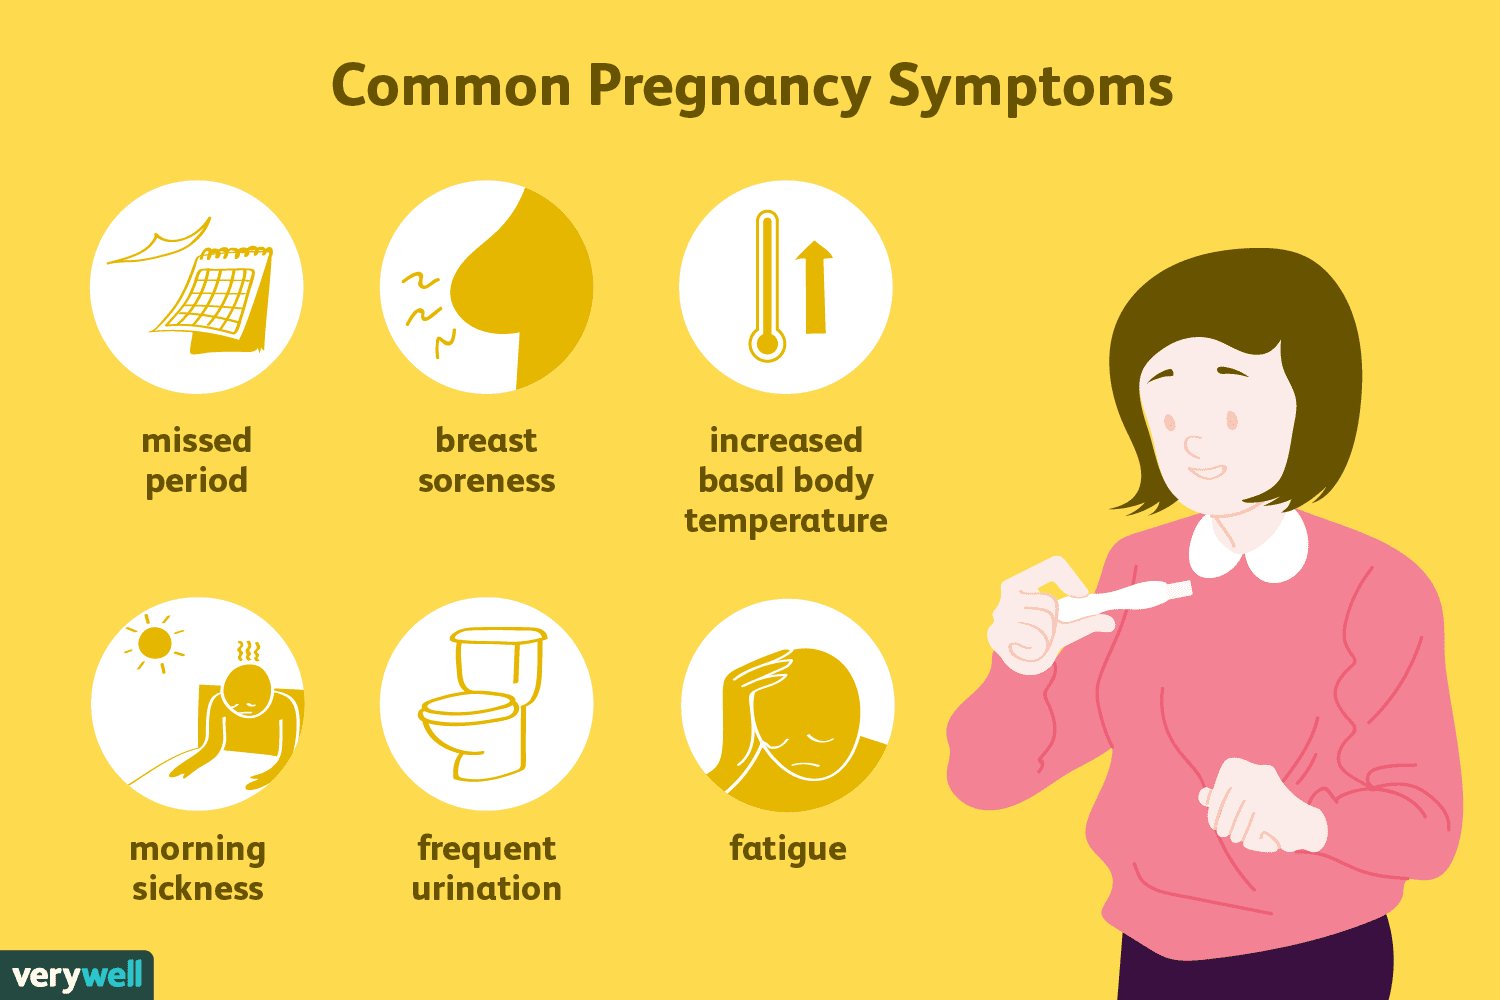 how early would pregnancy symptoms occur